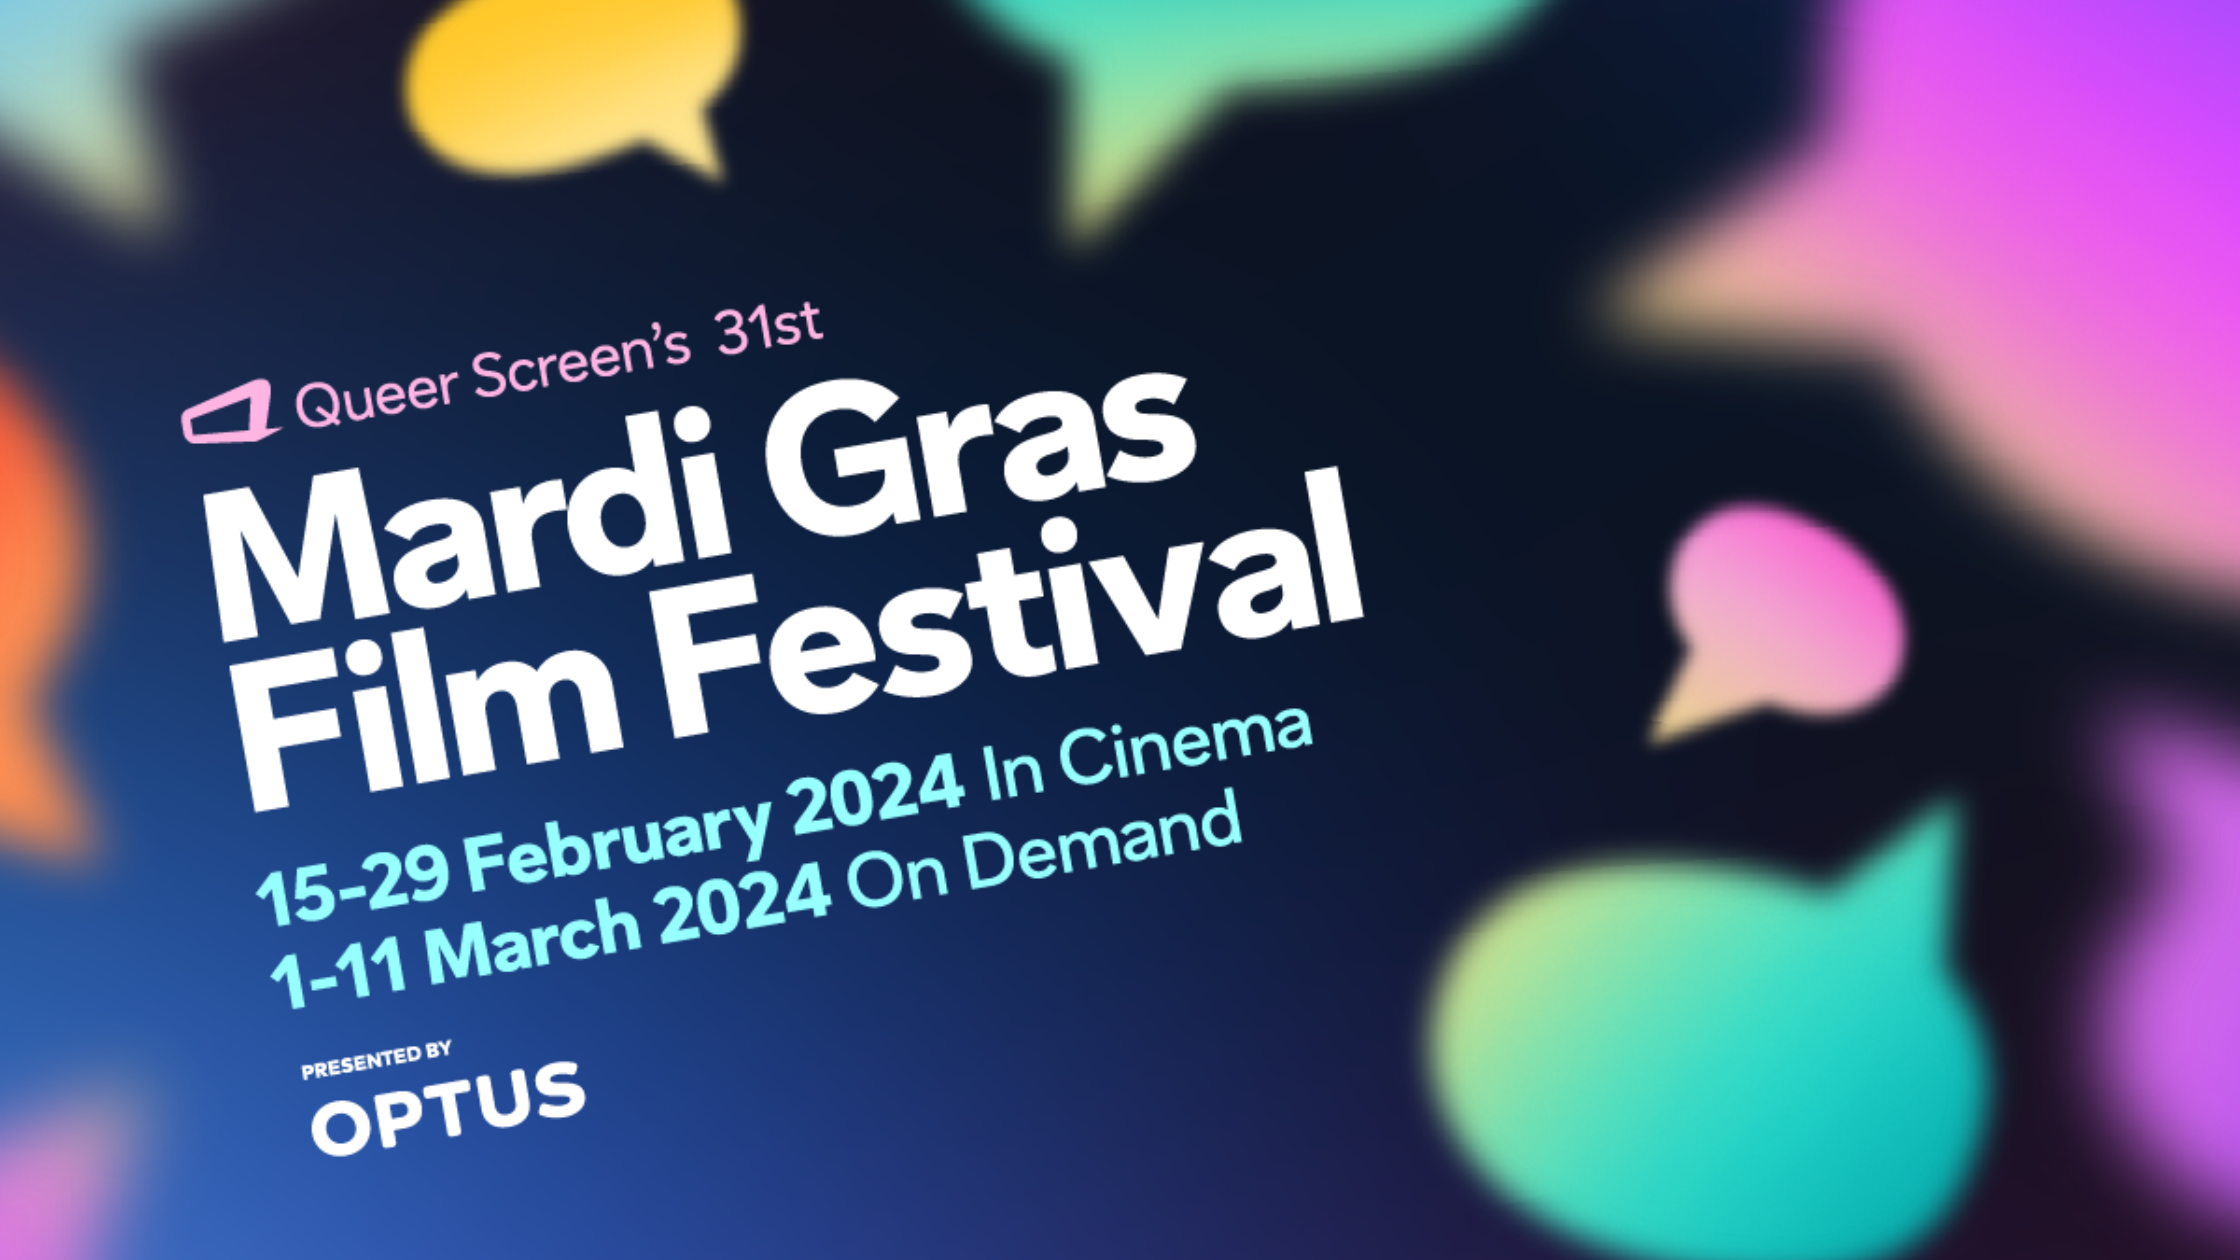 Colourful speech bubbles on a dark navy background. The text reads 'Queer Screen's 31st Mardi Gras Film Festival. Presented by Optus'.